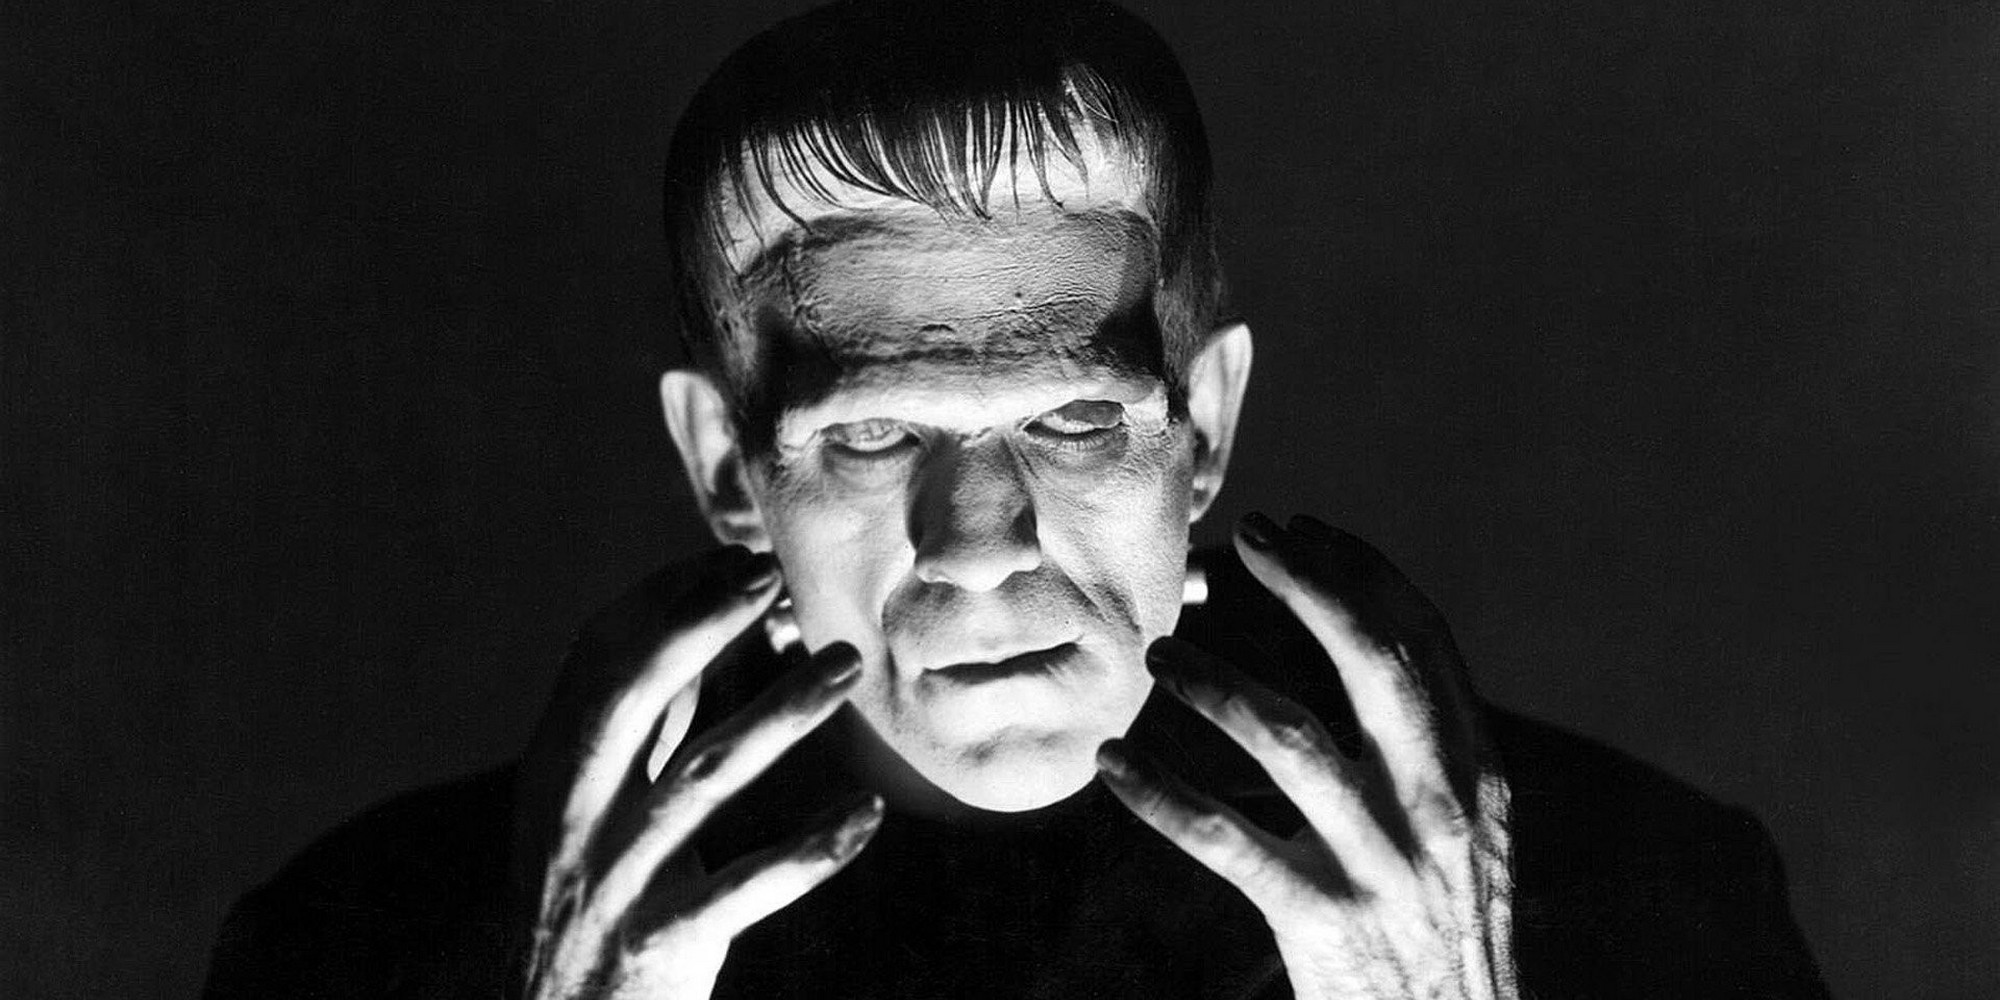 How Mary Shelley broke new ground with Frankenstein